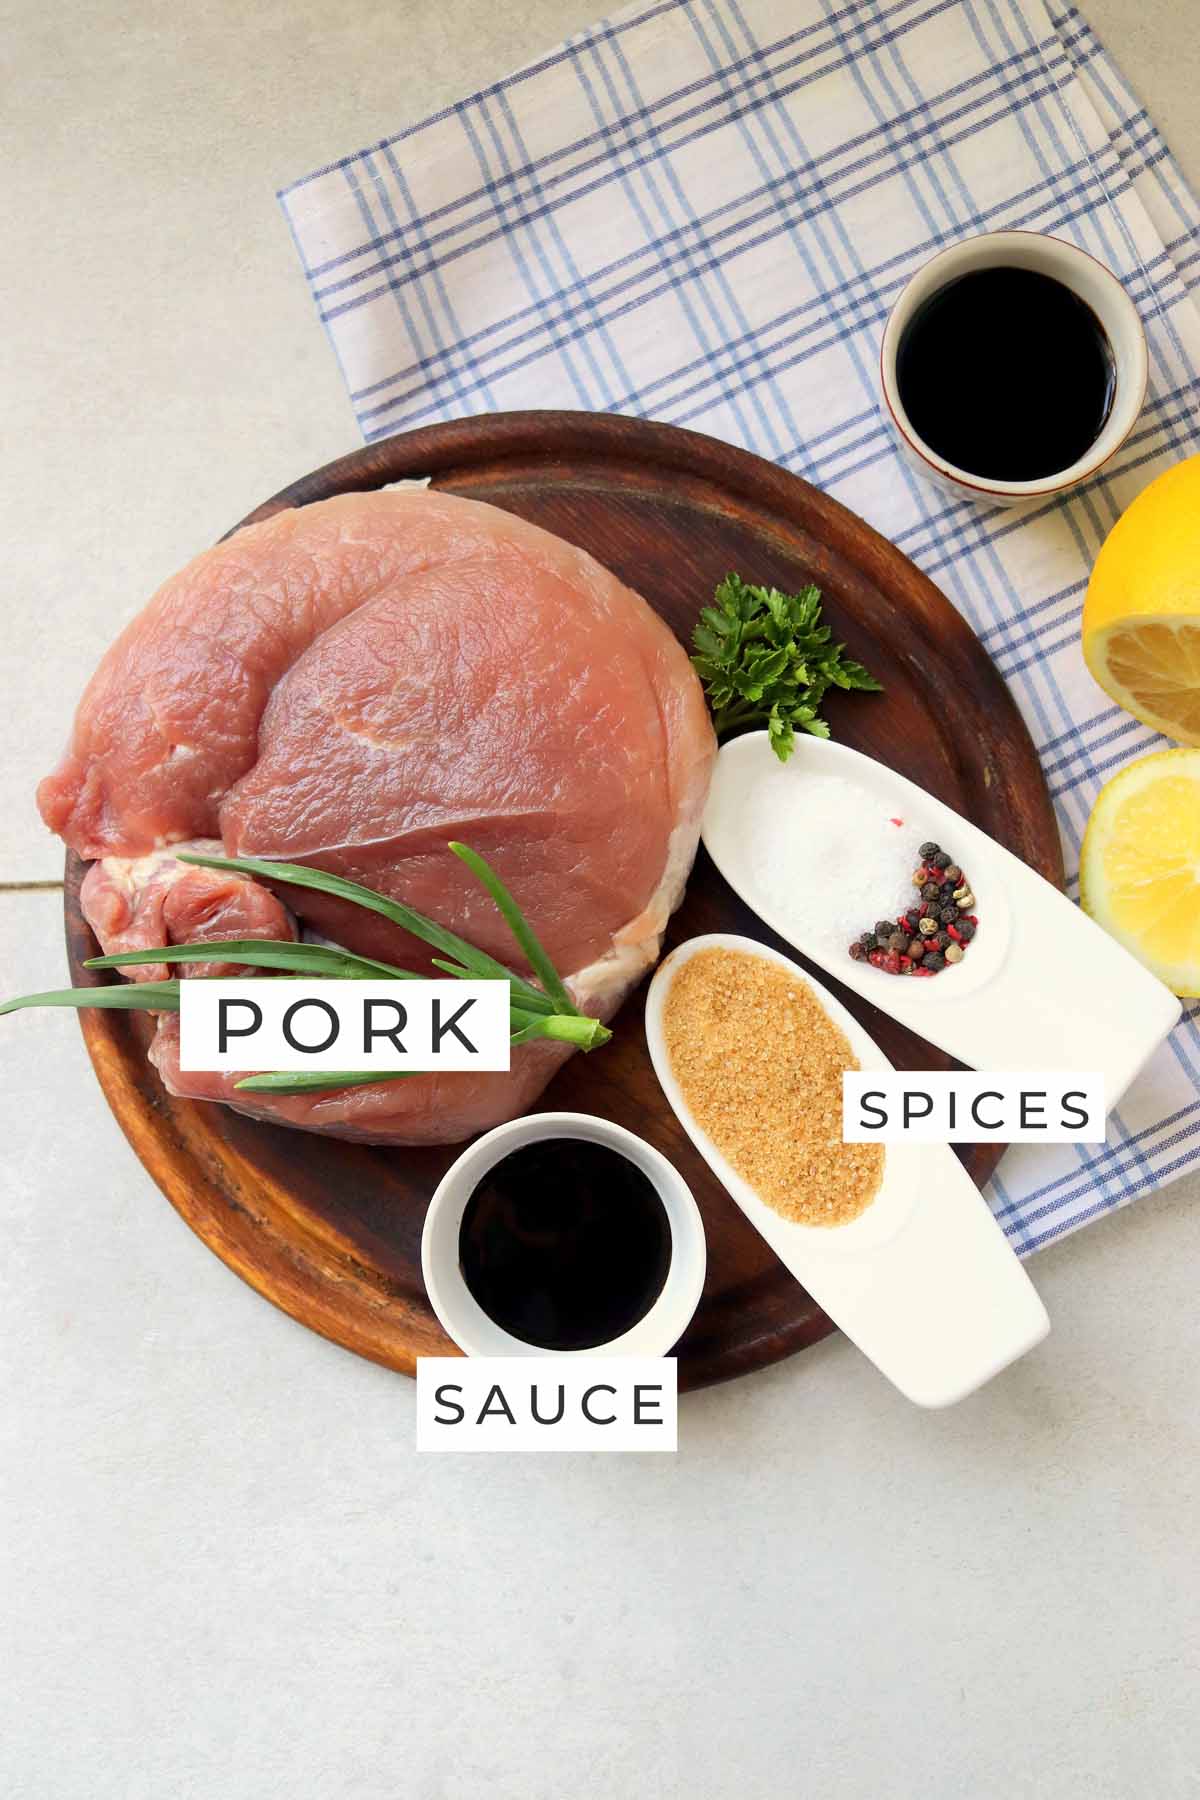 Labeled ingredients for the pork chops.